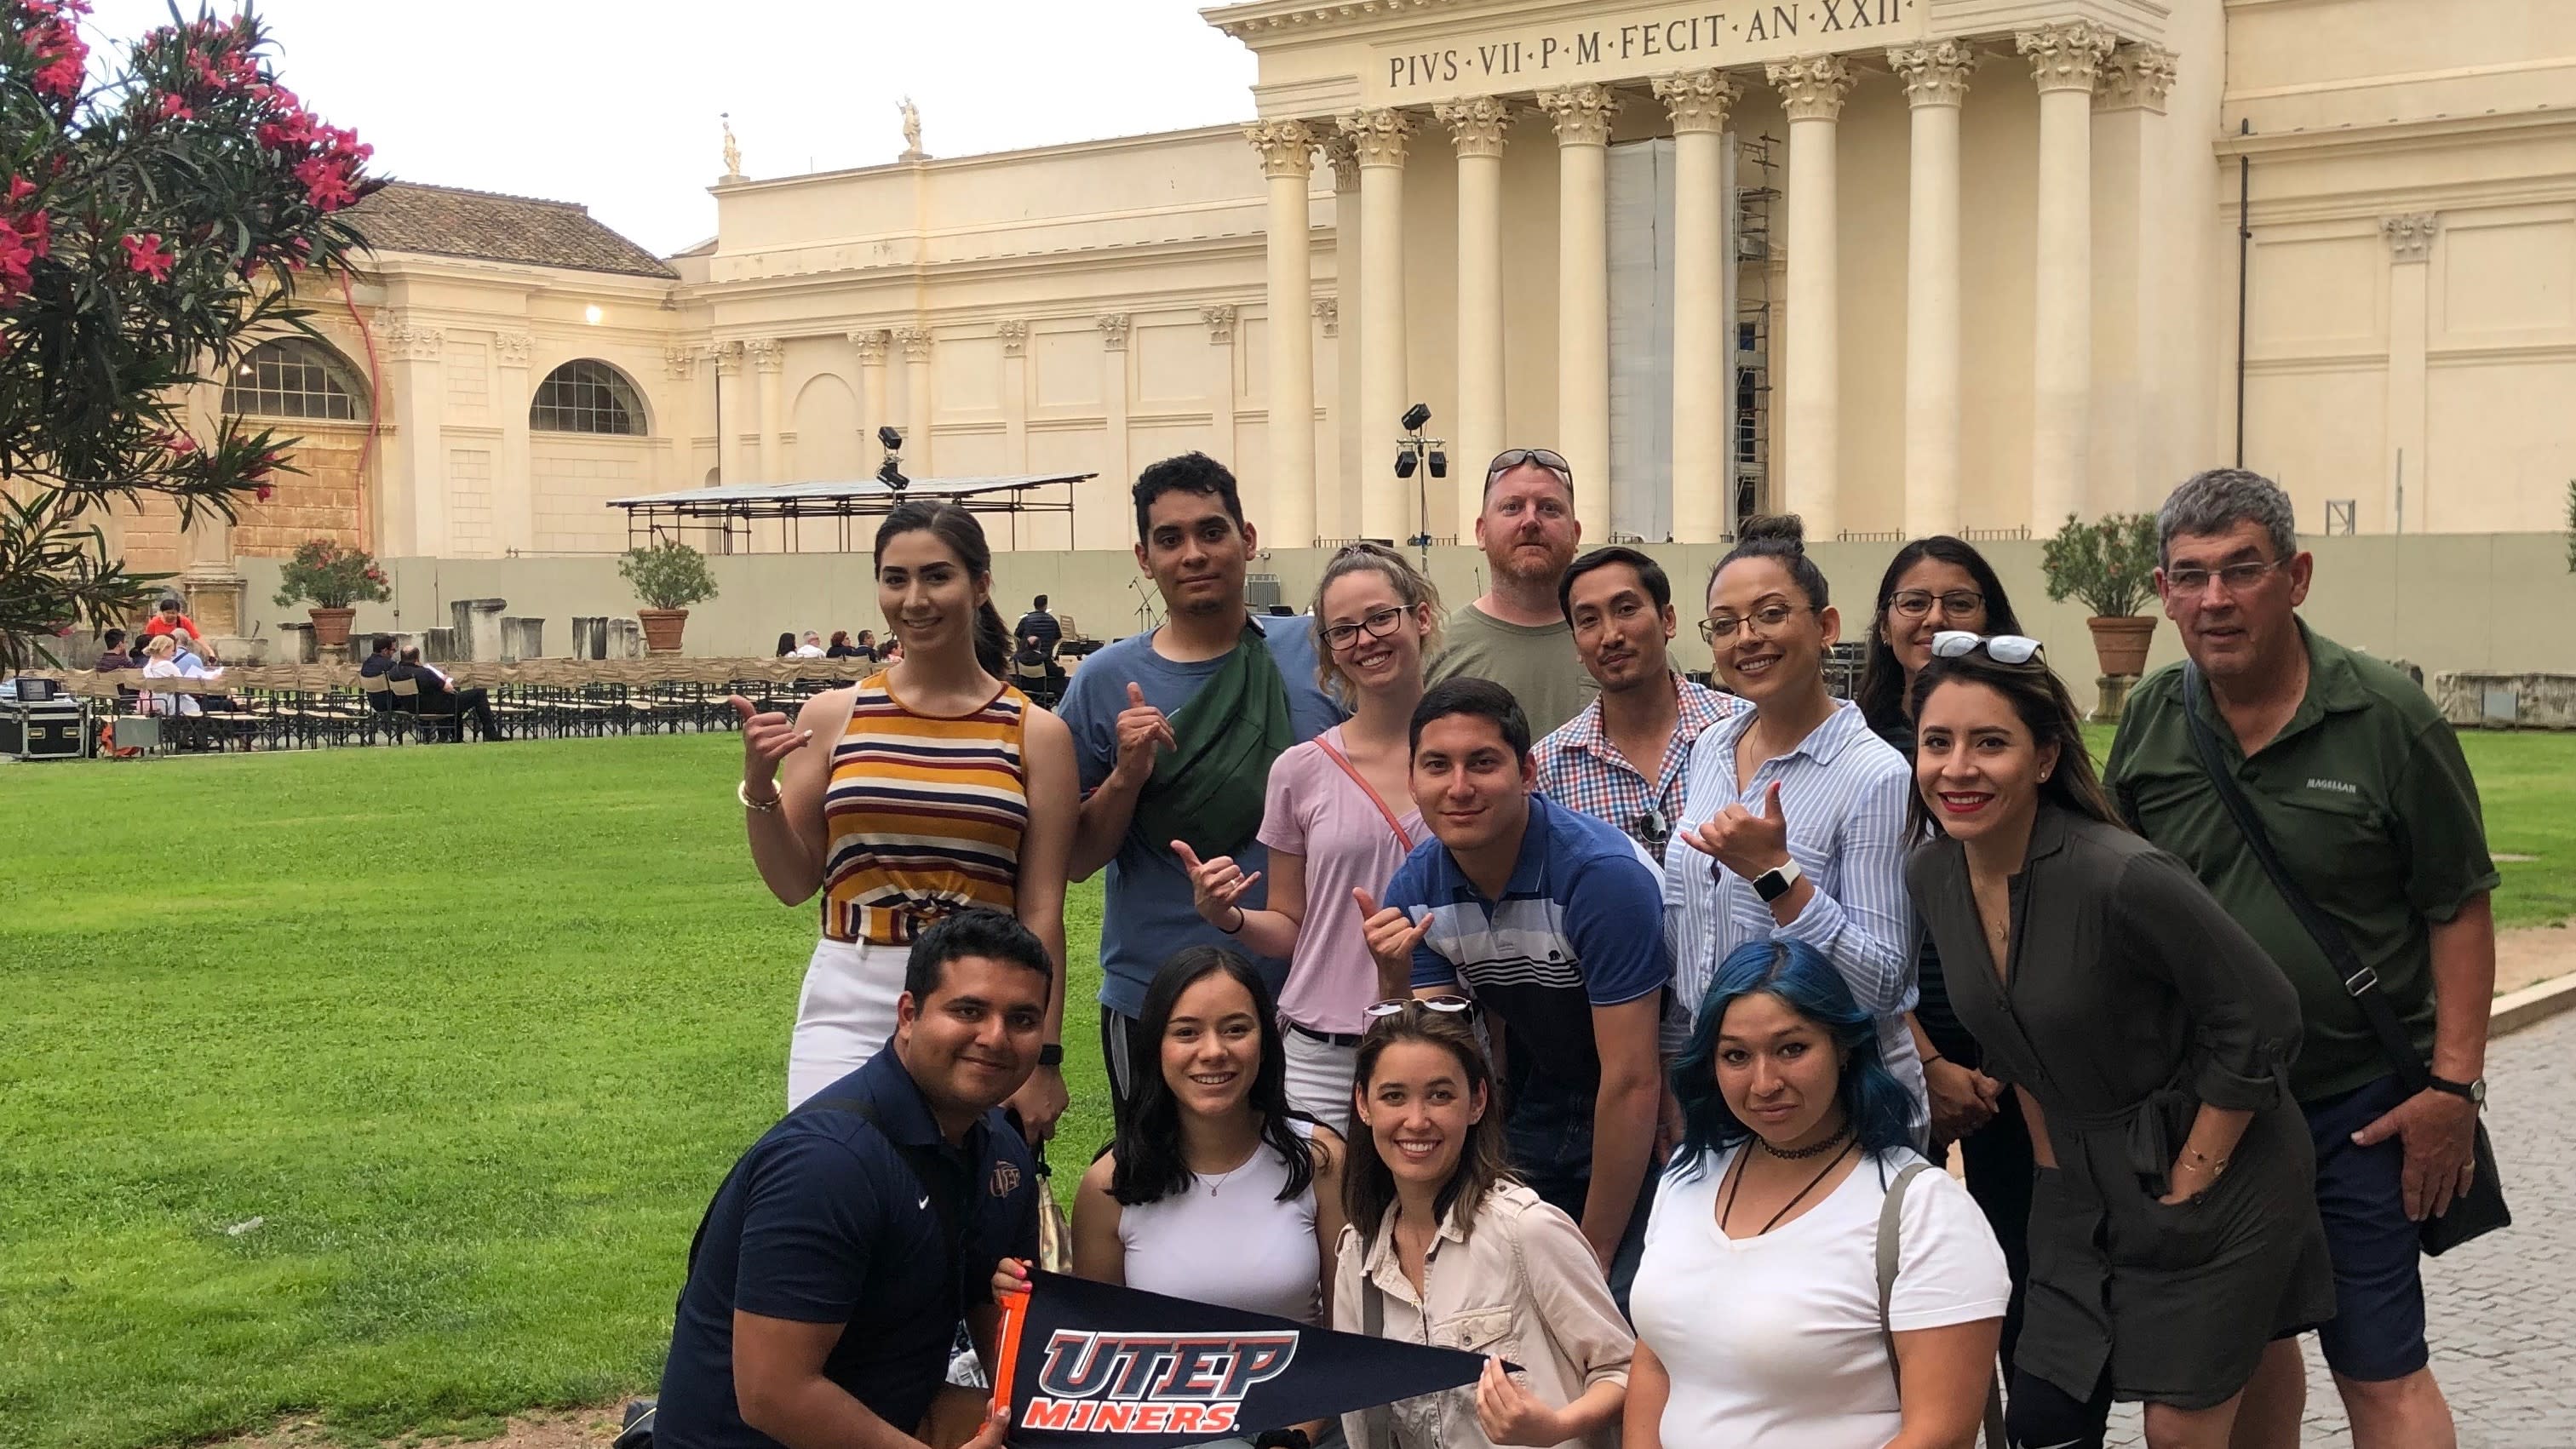 Group photo of UTEP Students holding UTEP Miner pennant in front of the Vatican Museum